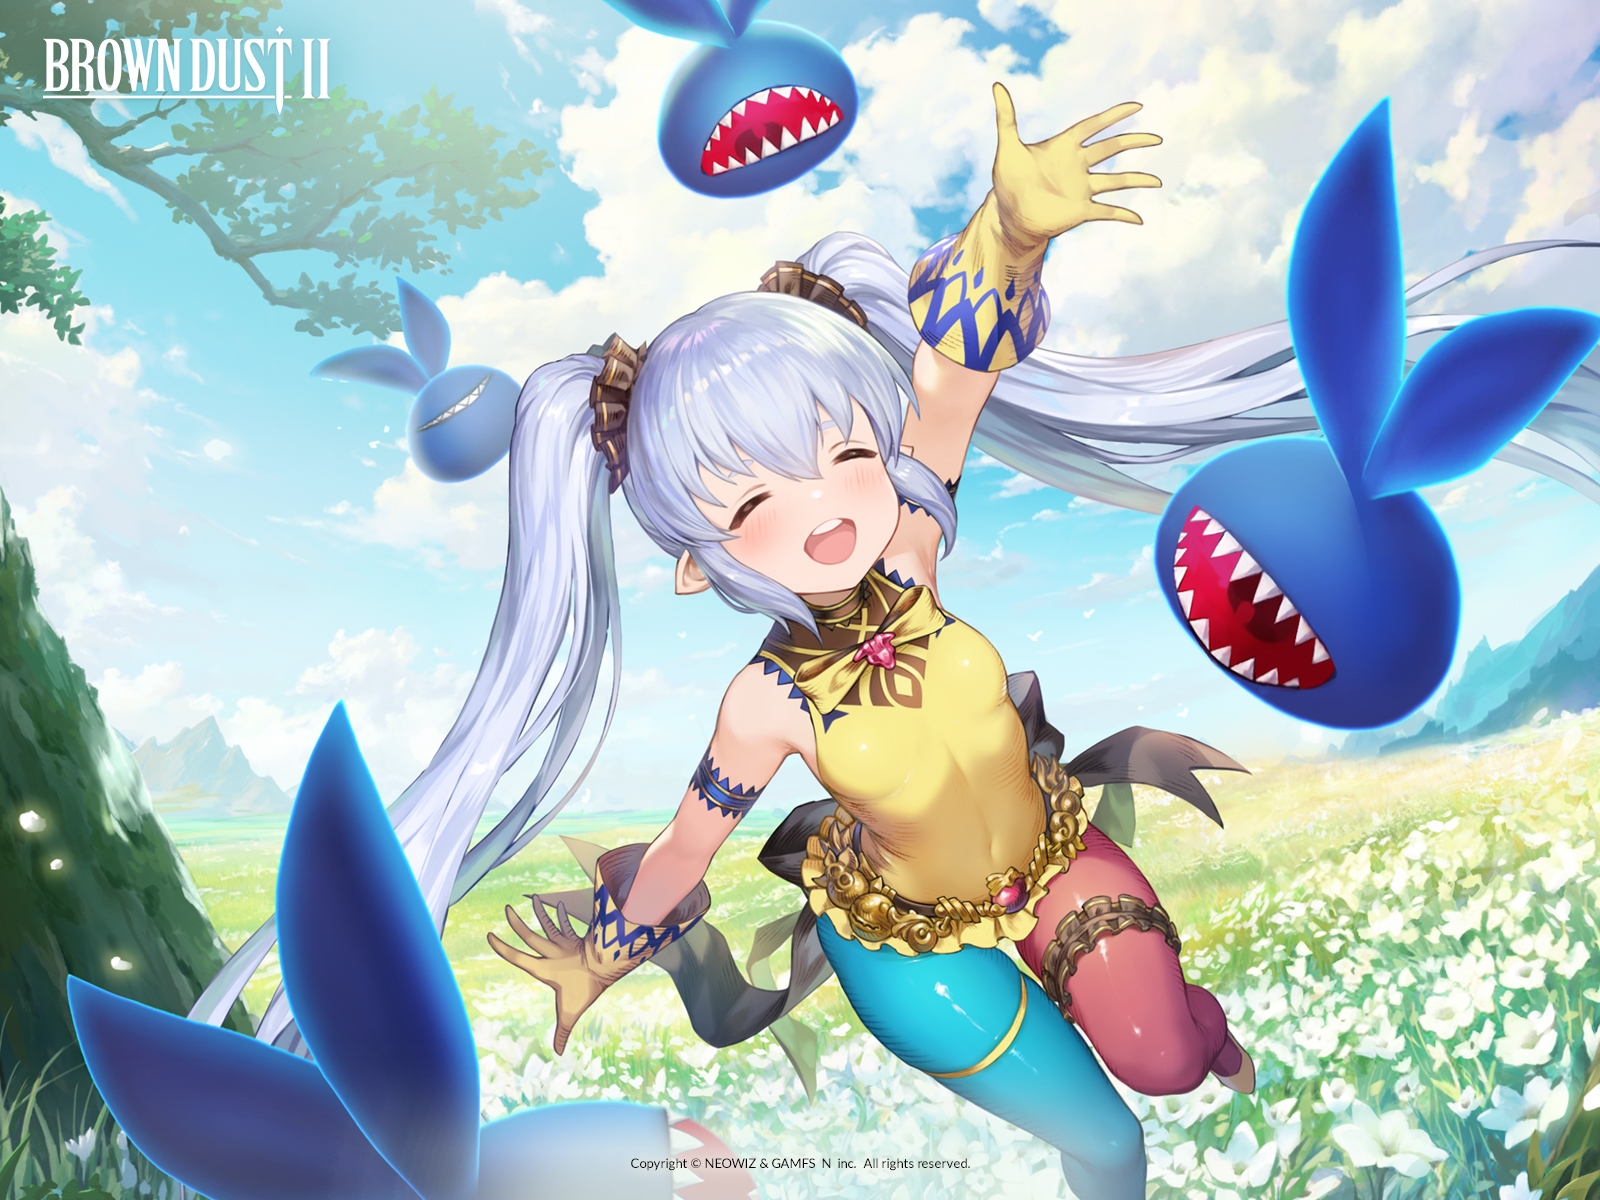 Anime 1600x1200 Brown Dust closed eyes twintails arms reaching white gloves gray hair mismatched stockings sky flowers field trees creature pointy ears running open mouth clouds watermarked